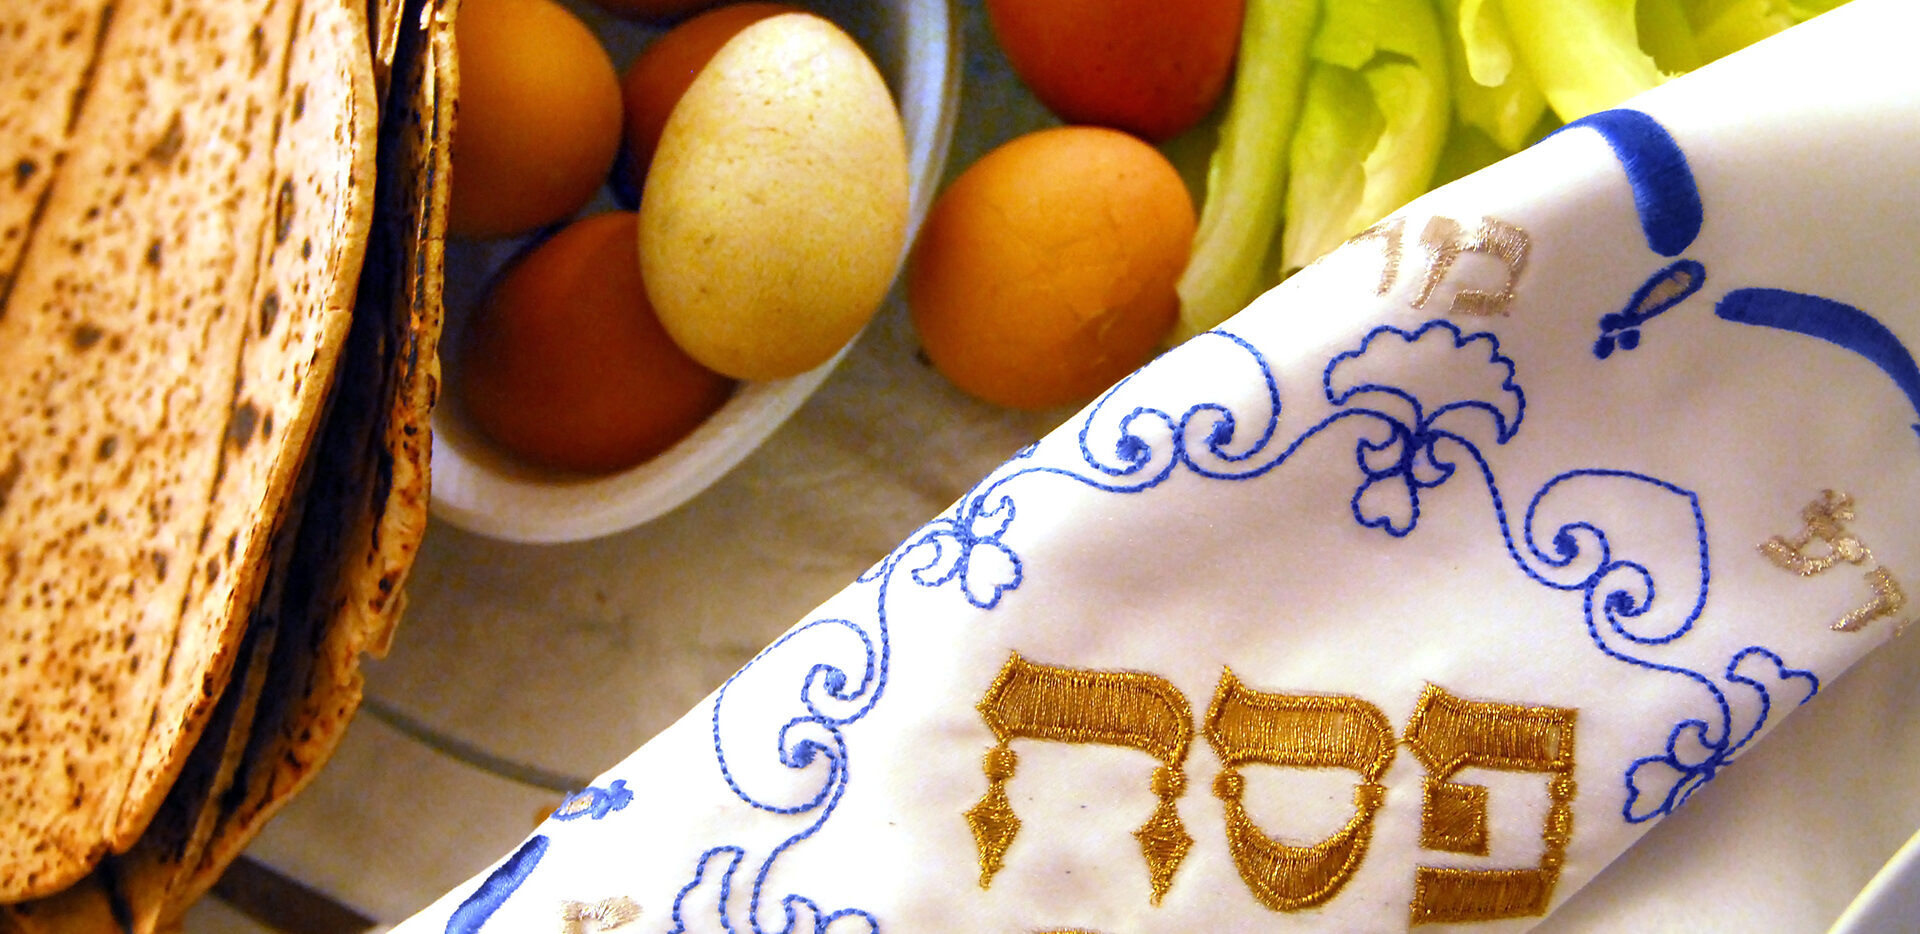 Image for Podcast: Mark Gerson on How the Seder Teaches Freedom Through Food